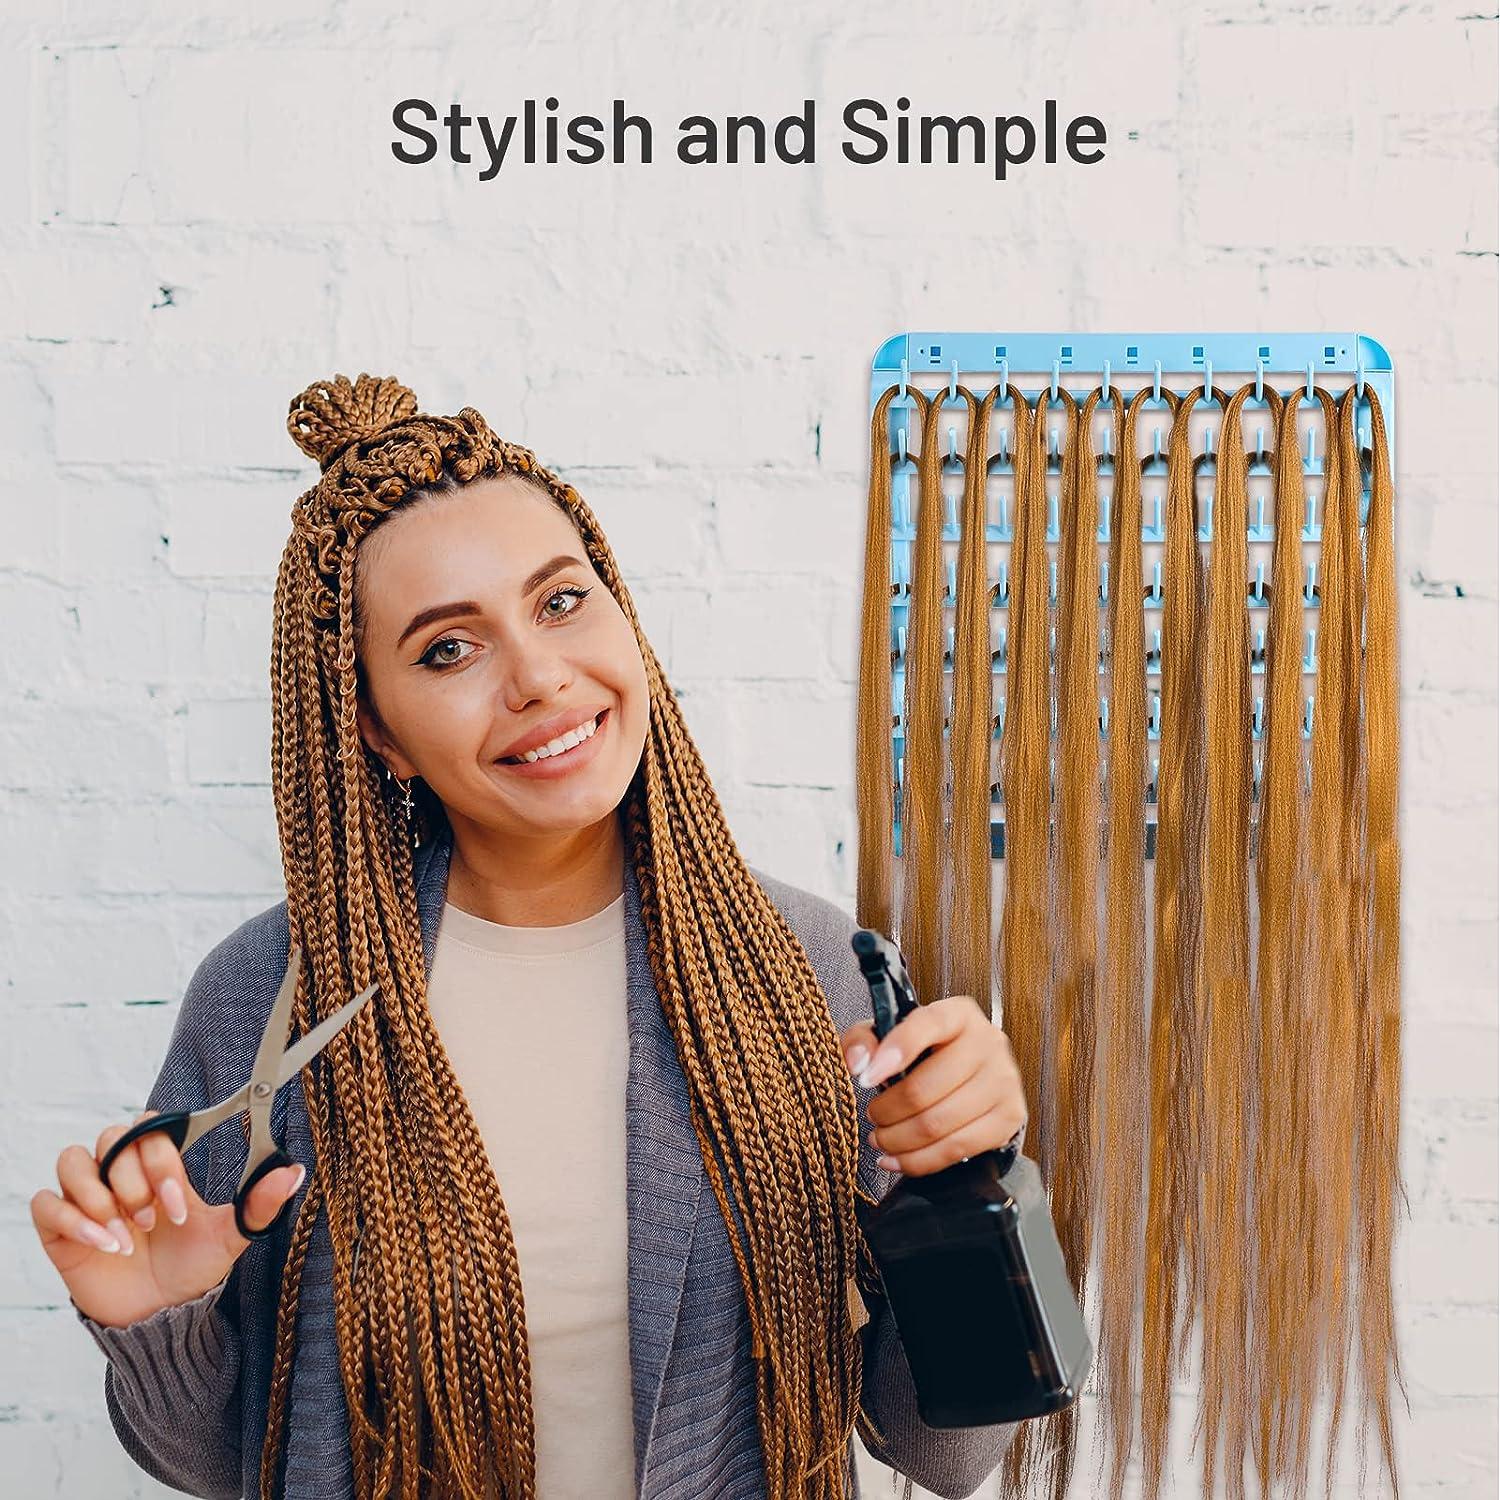 Yumkfoi Portable Braiding Hair Rack 120 Pegs 2-in-1 Standing Hair Holder  Braid Rack for Braiding Hair Double Sided Hair Separator Stand for Stylists  Hair Extension Holder with Hair Supplies Blue Plastic-120 pegs